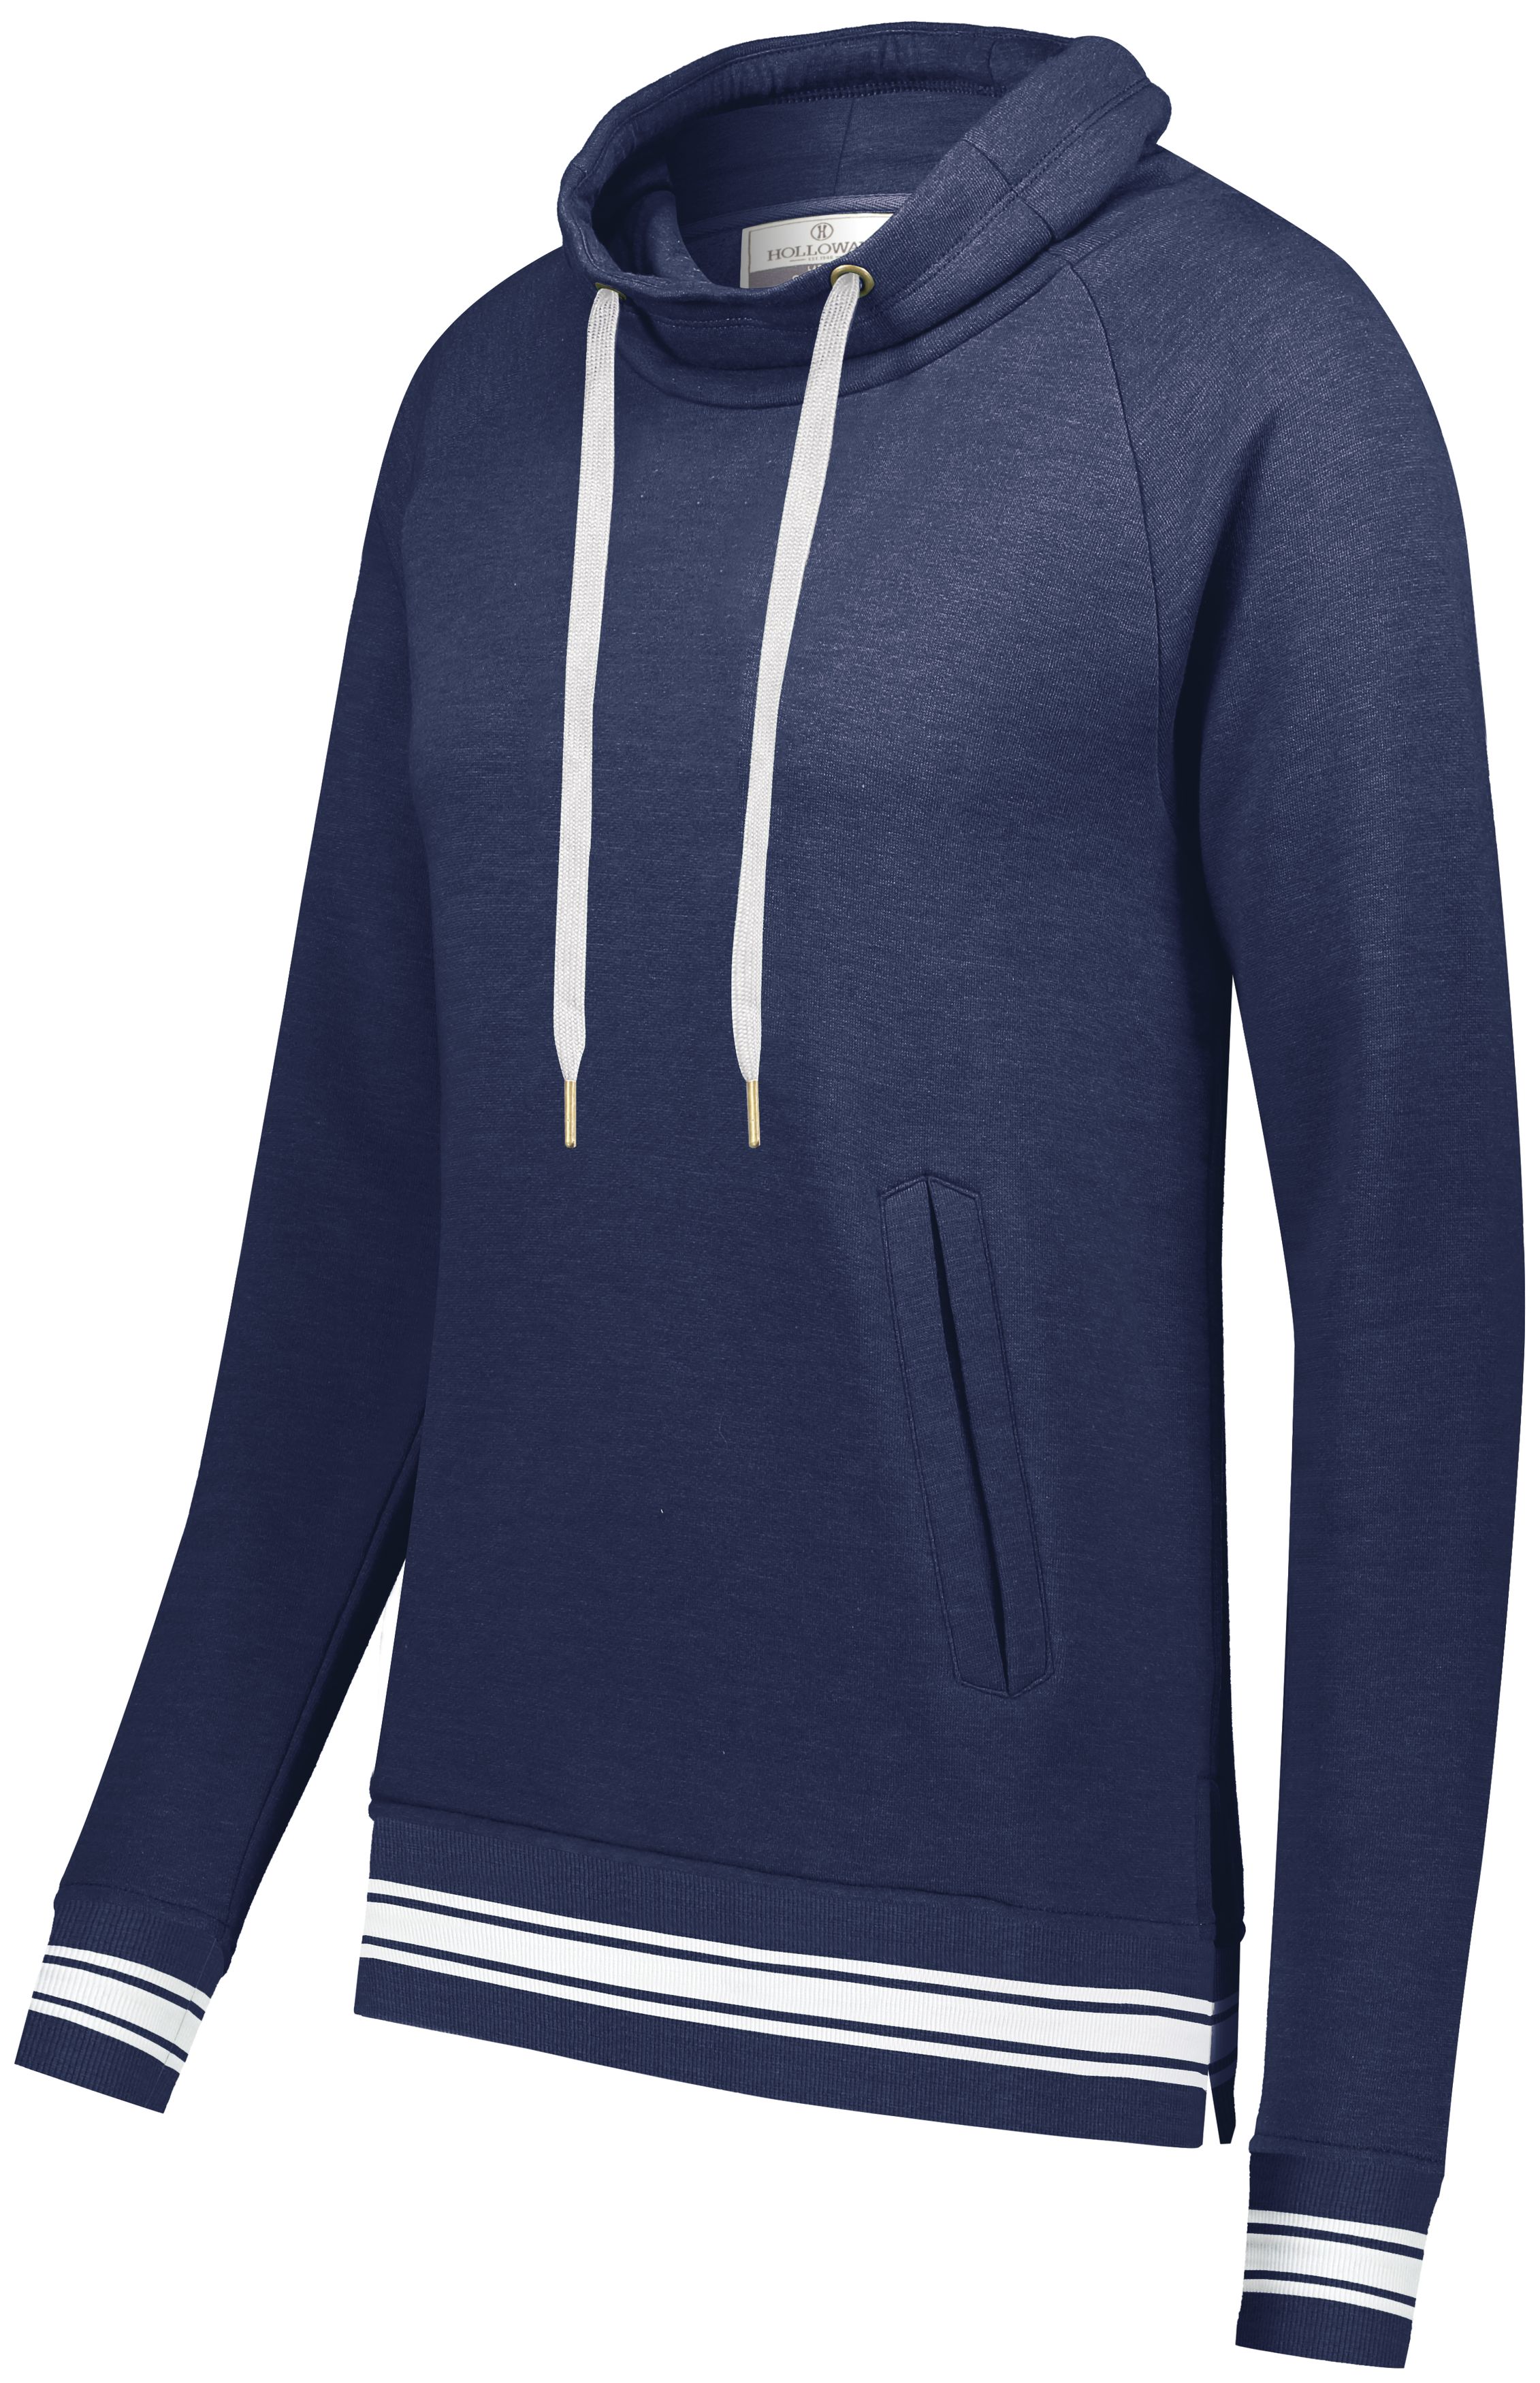 Holloway 229763 - Ladies Ivy League Funnel Neck Pullover